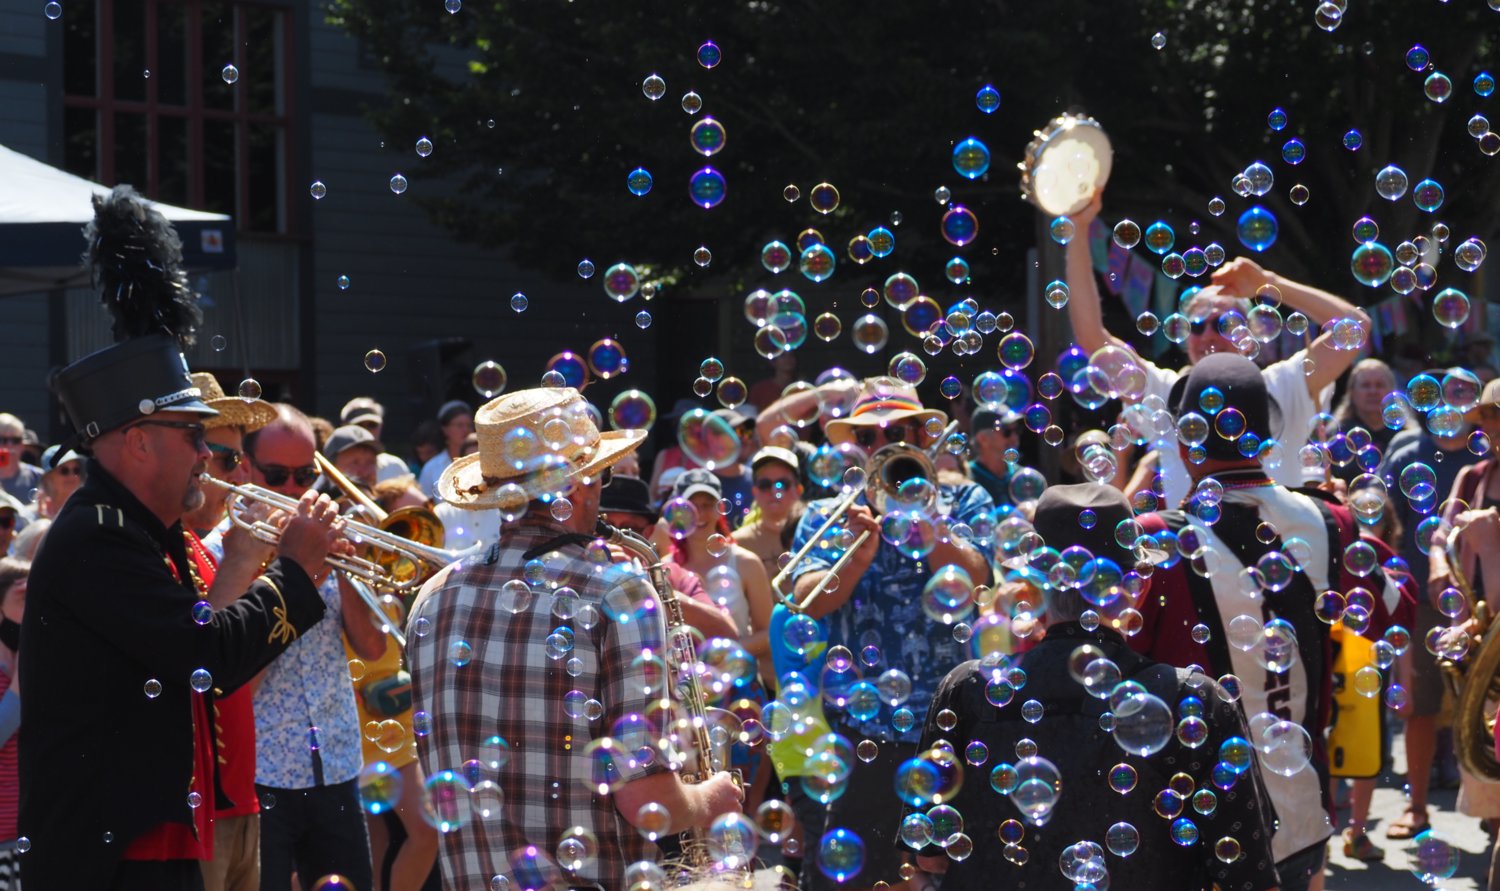 The Unexpected Brass Band circled up in a sea of bubbles at the end of the parade for a dance party with the crowd.